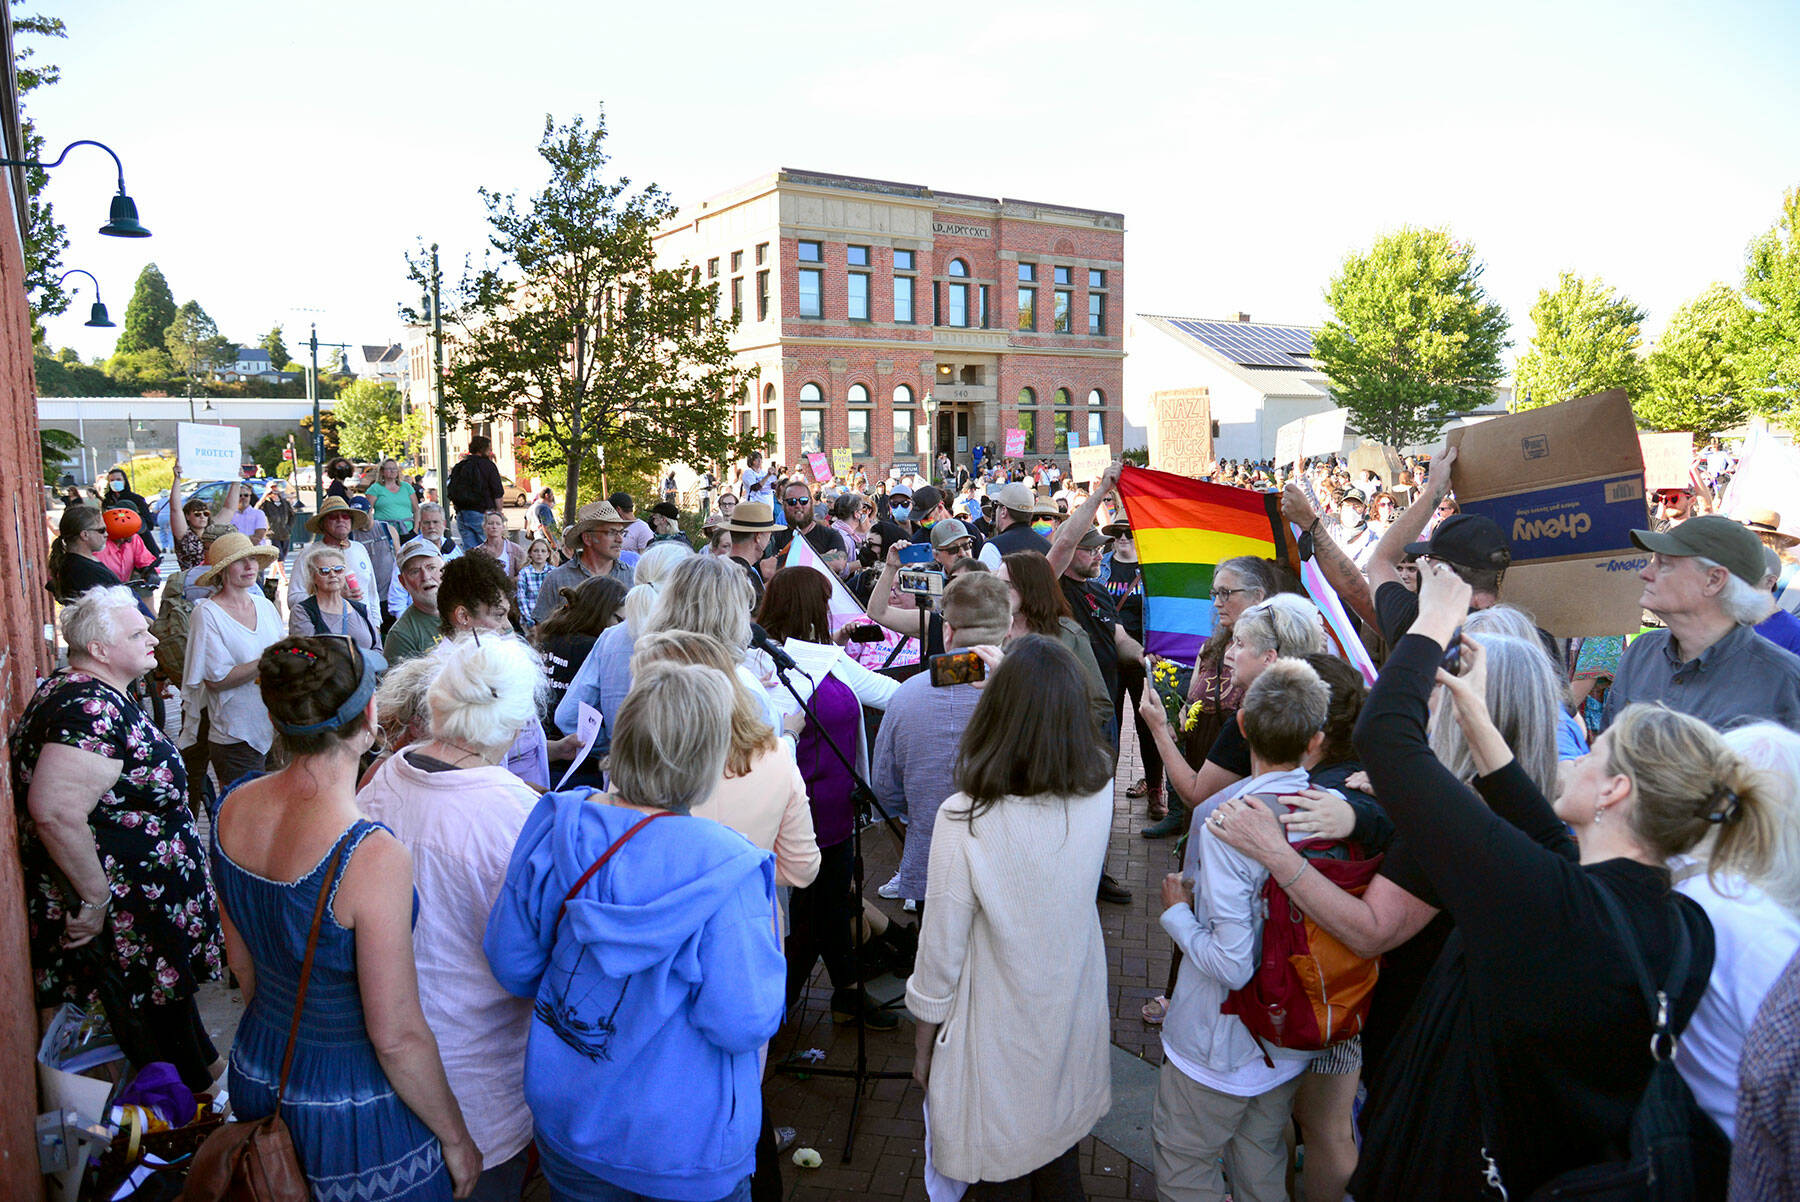 Hundreds of people gathered in downtown Port Townsend on Monday, mostly to support the policy of allowing transgender people to use the bathroom of their choice, but small scuffles broke out between protester groups, and one man was arrested. (Peter Segall / Peninsula Daily News)